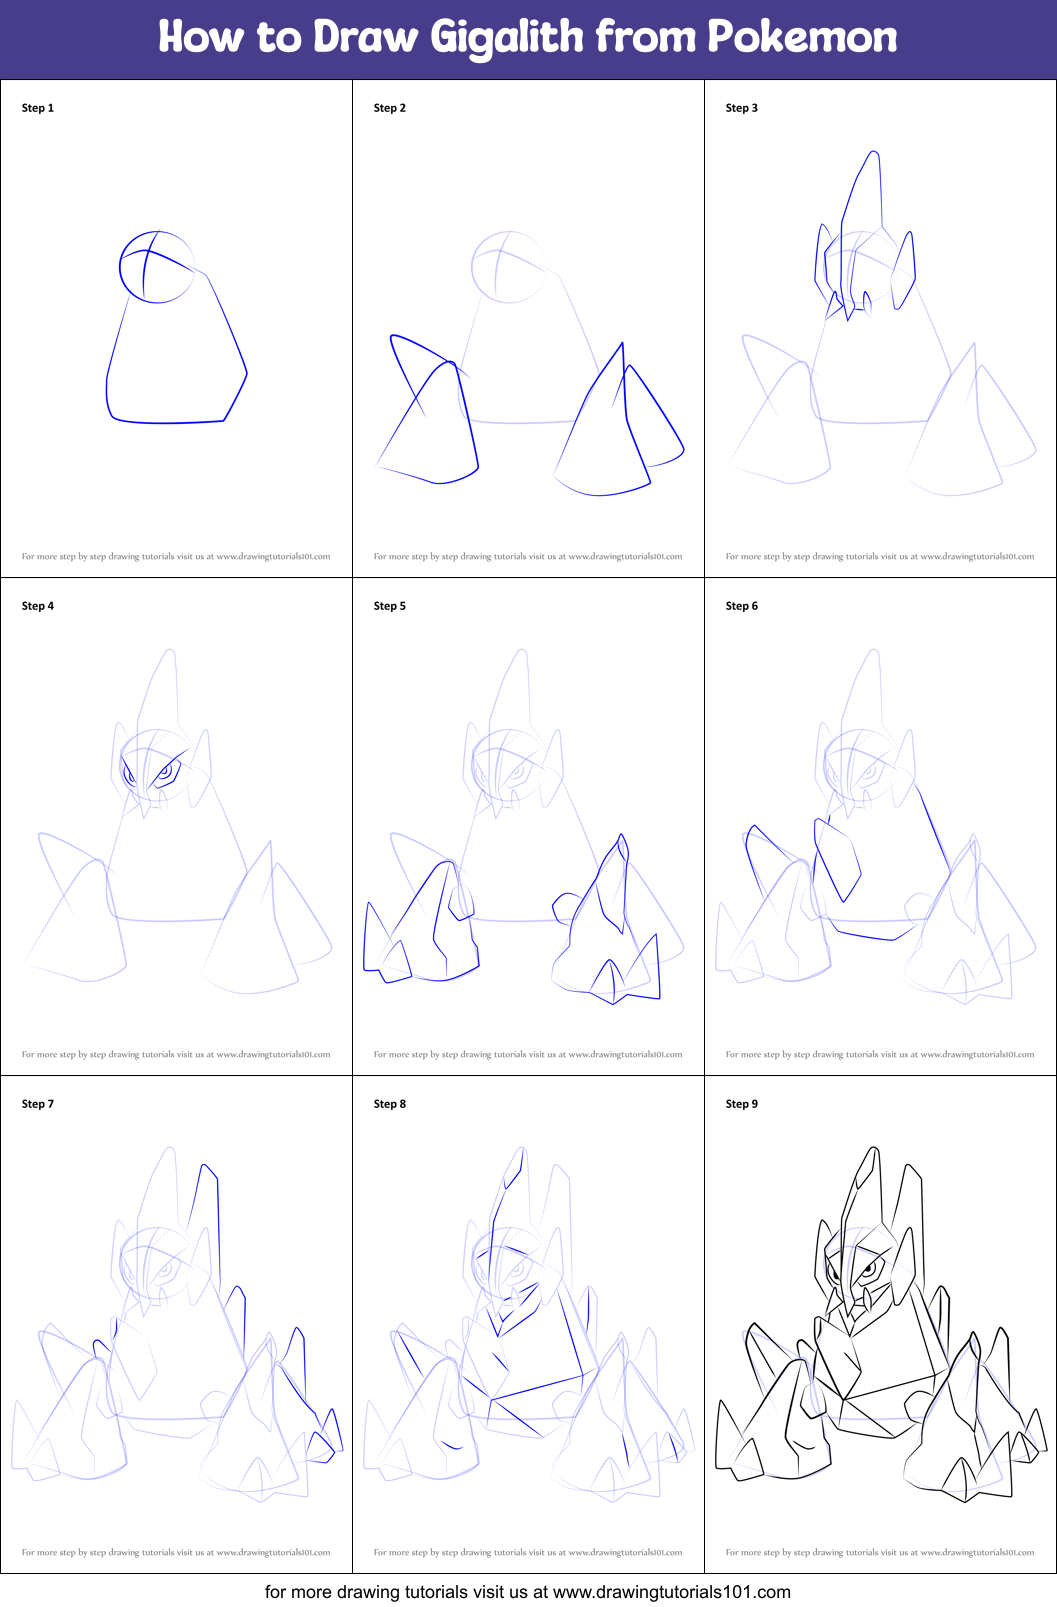 How to Draw Gigalith from Pokemon printable step by step drawing sheet